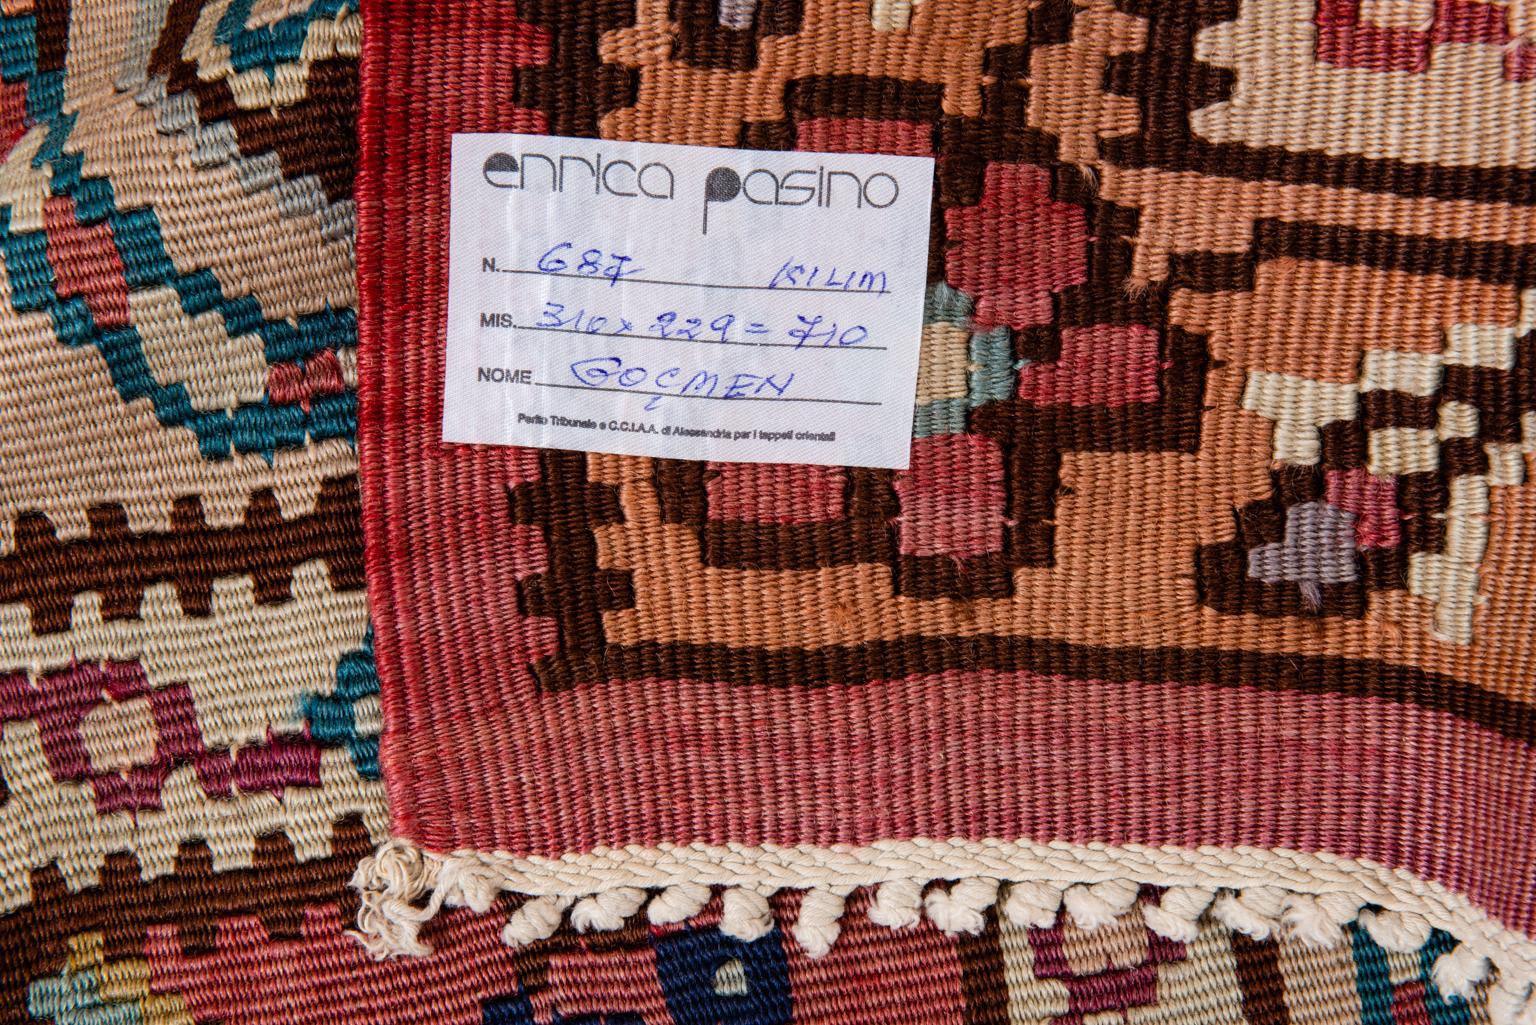 Pleasant vintage Turkish kilim Goçmen with soft colors and design - suitable for a sitting or sleeping room - 
Rare design without central medallion, easy to set everywhere.
It's not affected by fashion:  it's a genuine product !
nr. 687.